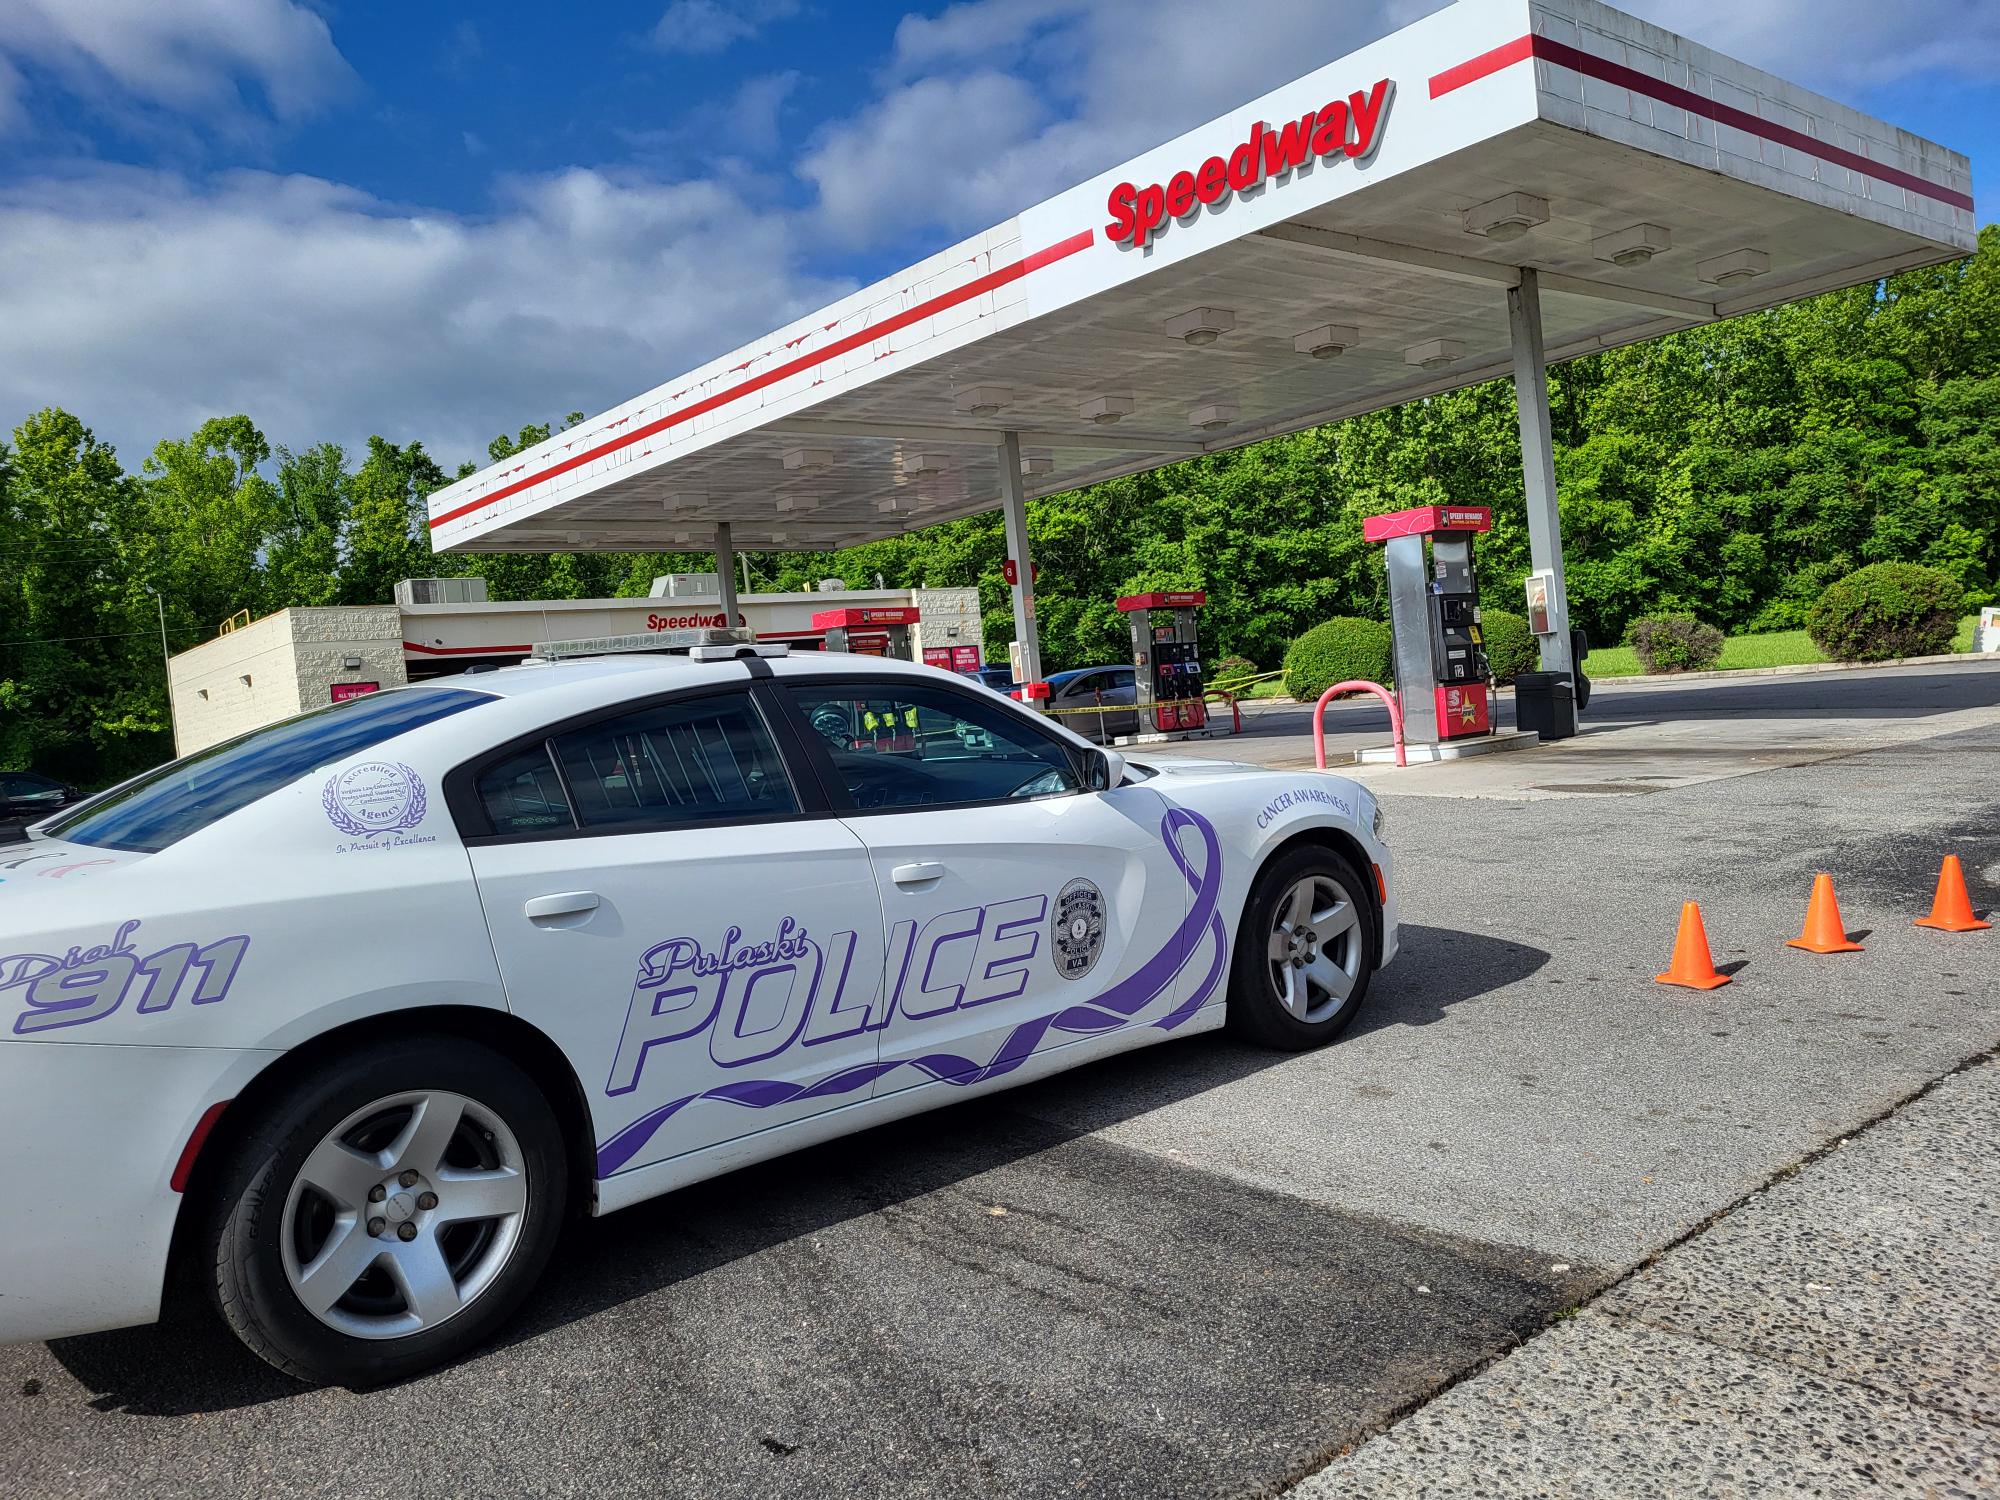 The Pulaski Police Department says a man who was wanted in connection to a deadly shooting at the Speedway gas station on May 24 was apprehended in Ohio. (Dustin Dustin Hennessey/ WFXR News)